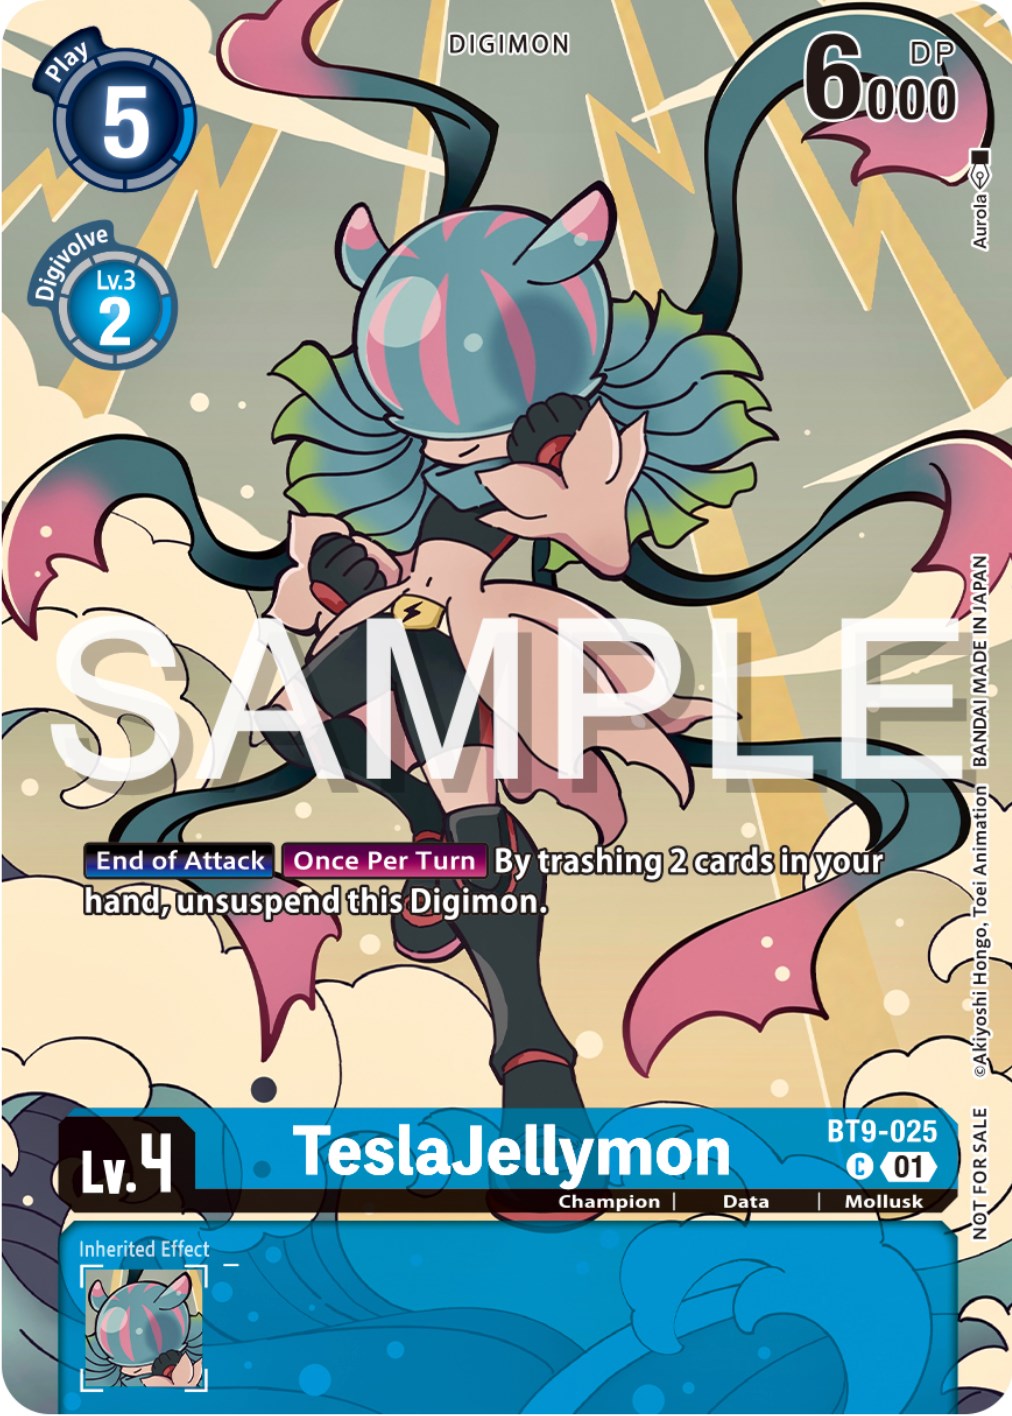 TeslaJellymon [BT9-025] (Digimon Illustration Competition Pack 2023) [X Record Promos] | Red Riot Games CA